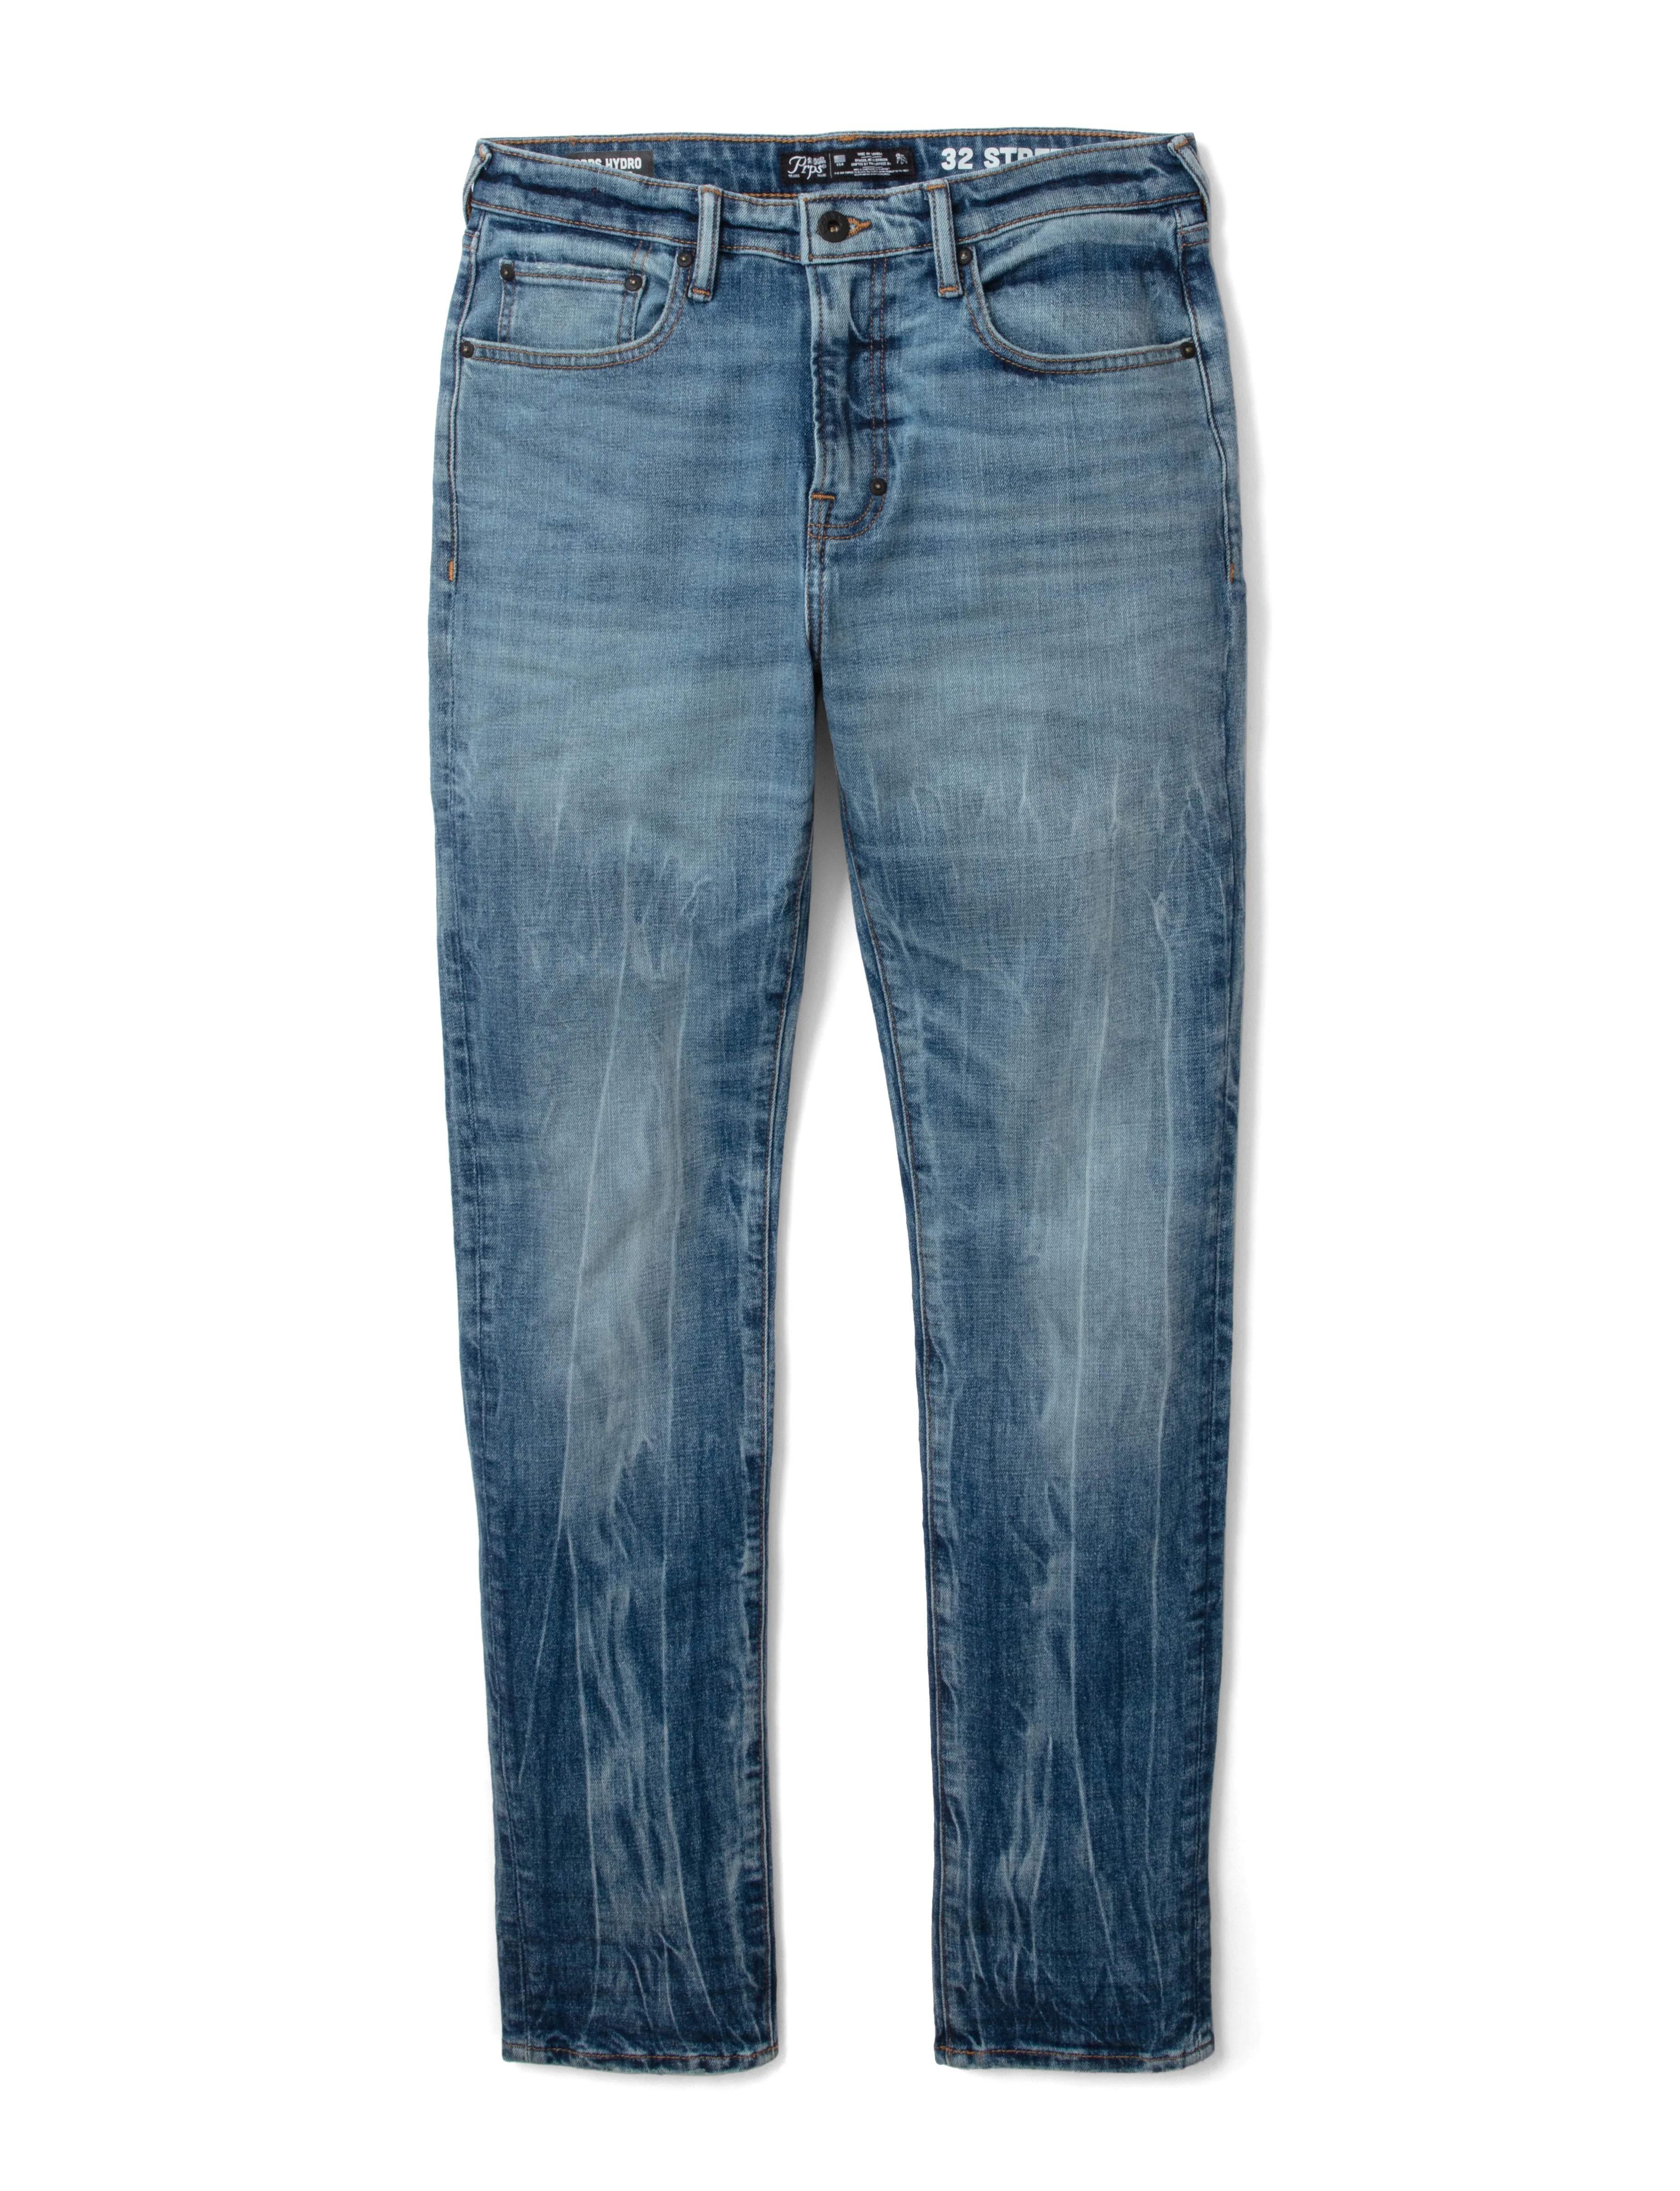 Prps Winds Skinny Jeans In Indigo Mix | ModeSens